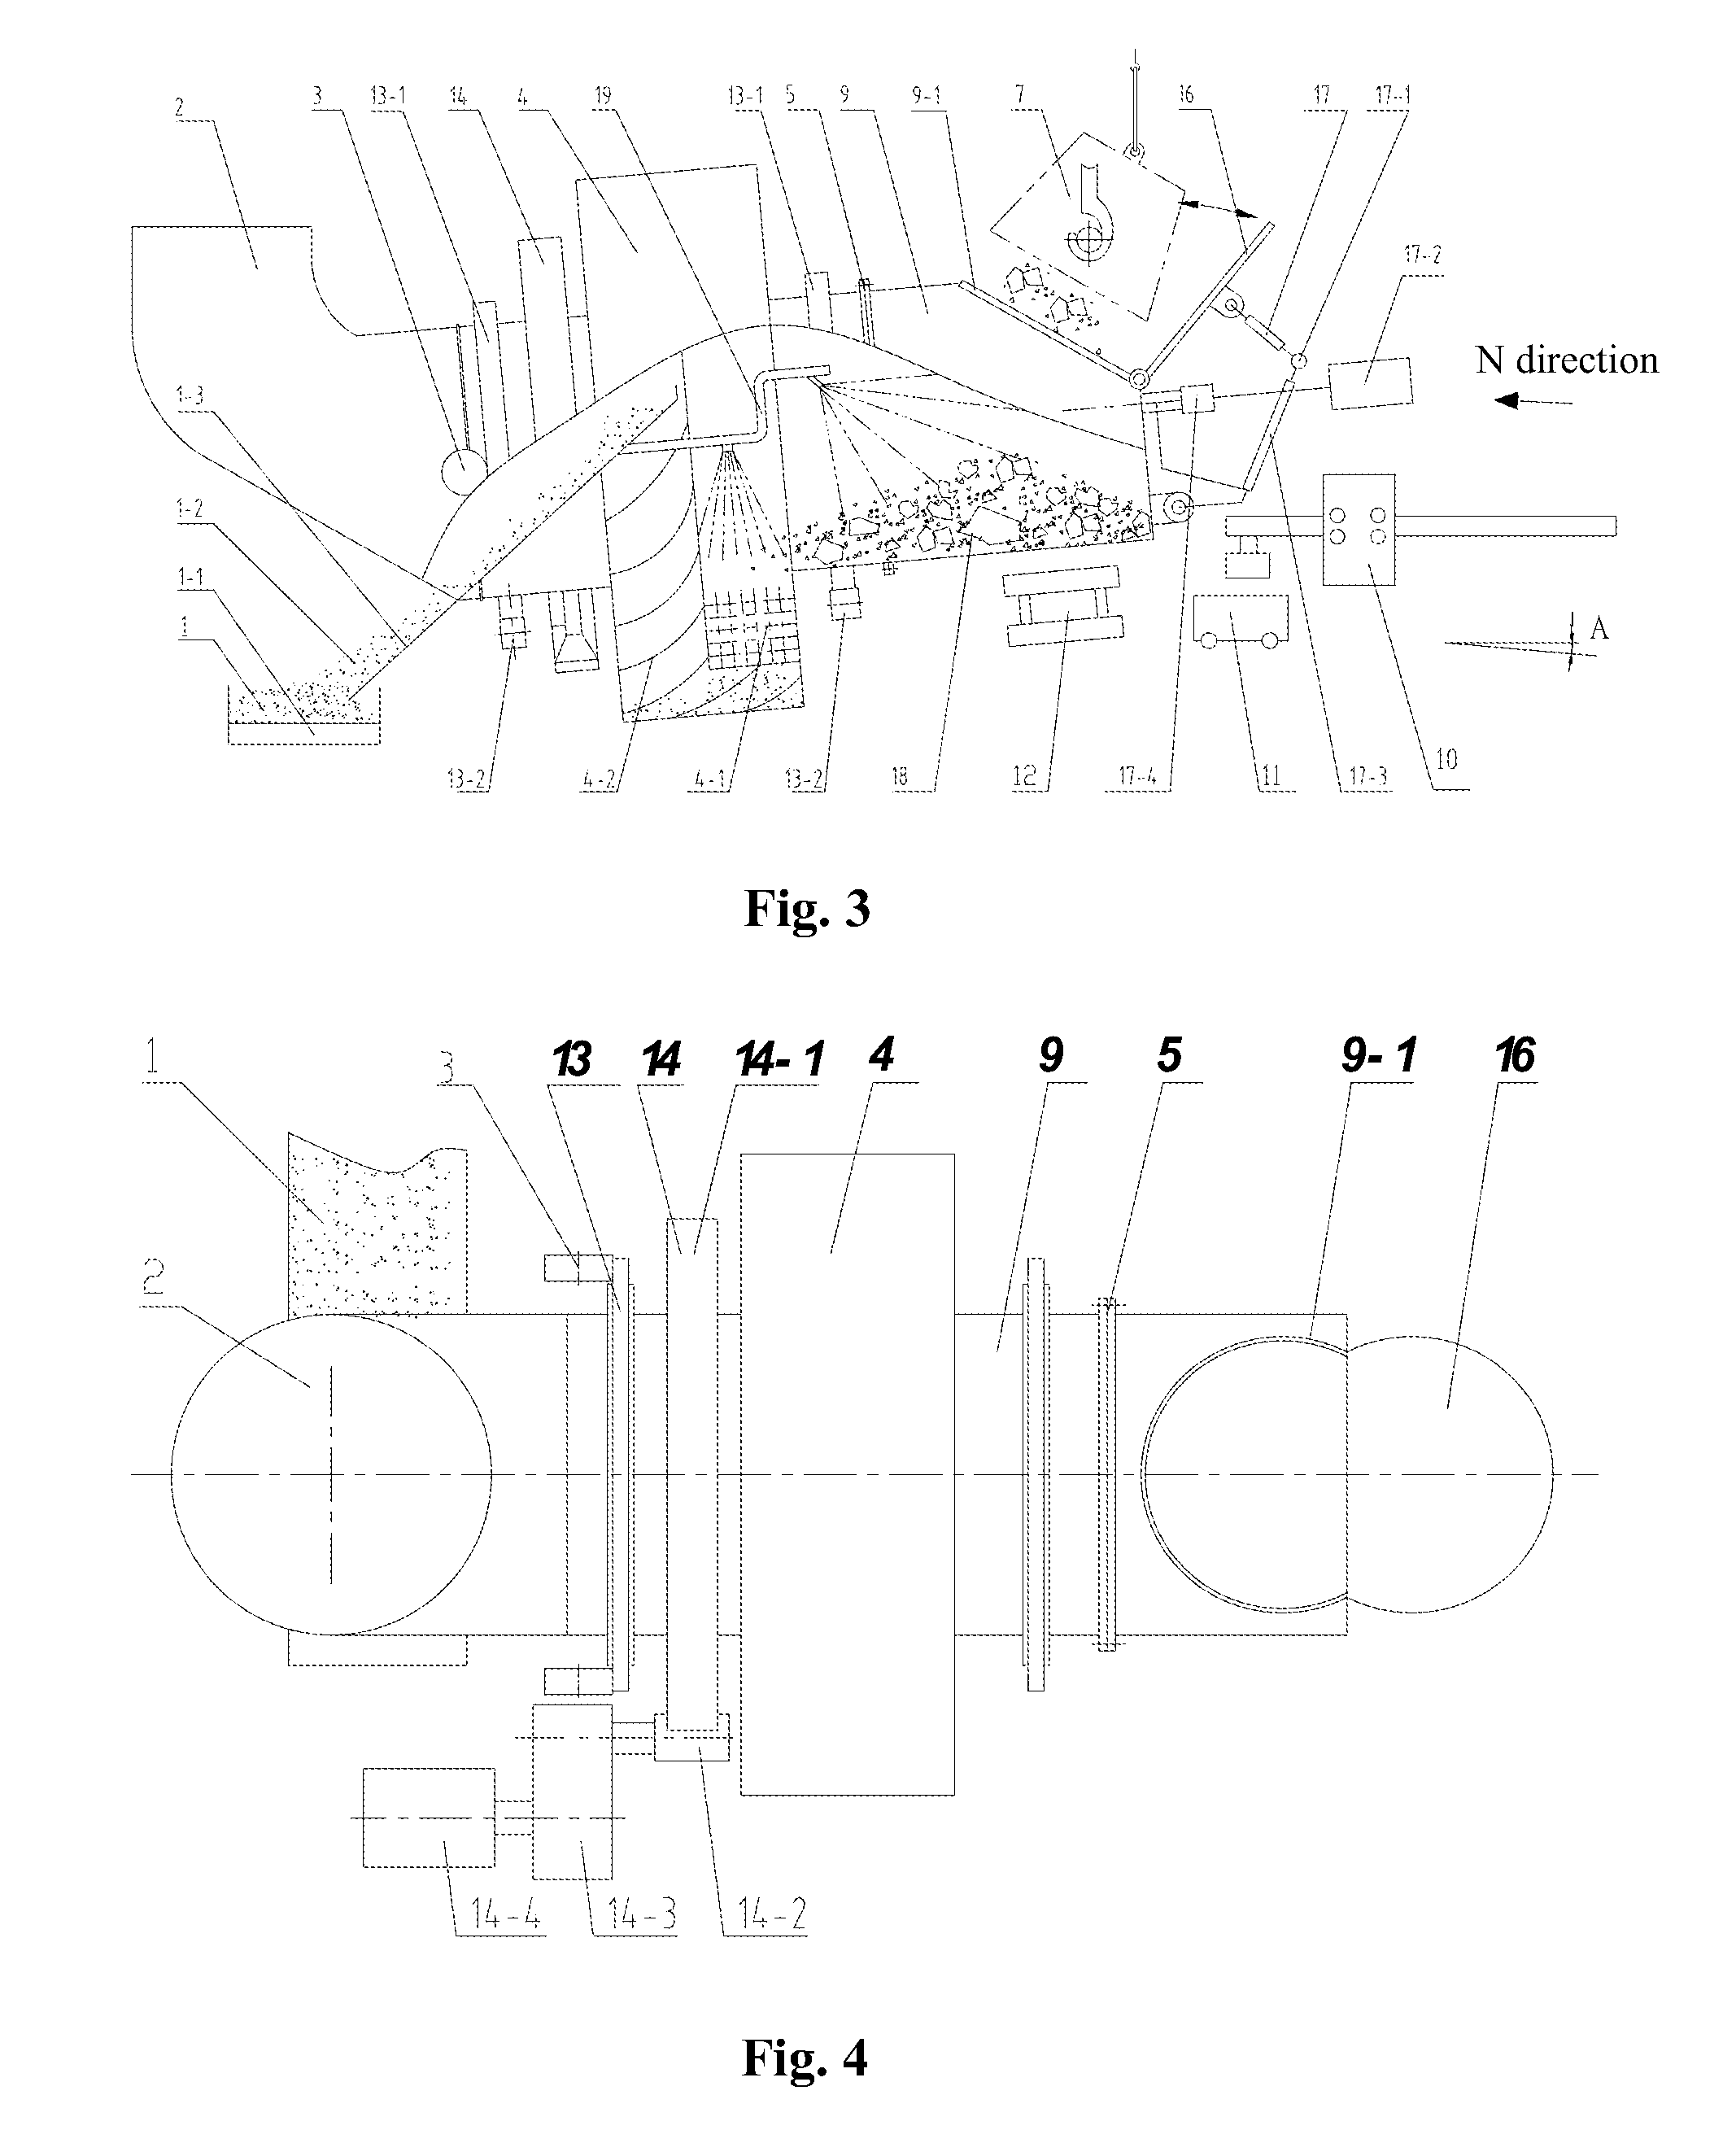 Processing method and system for high-temperature solid steel slag